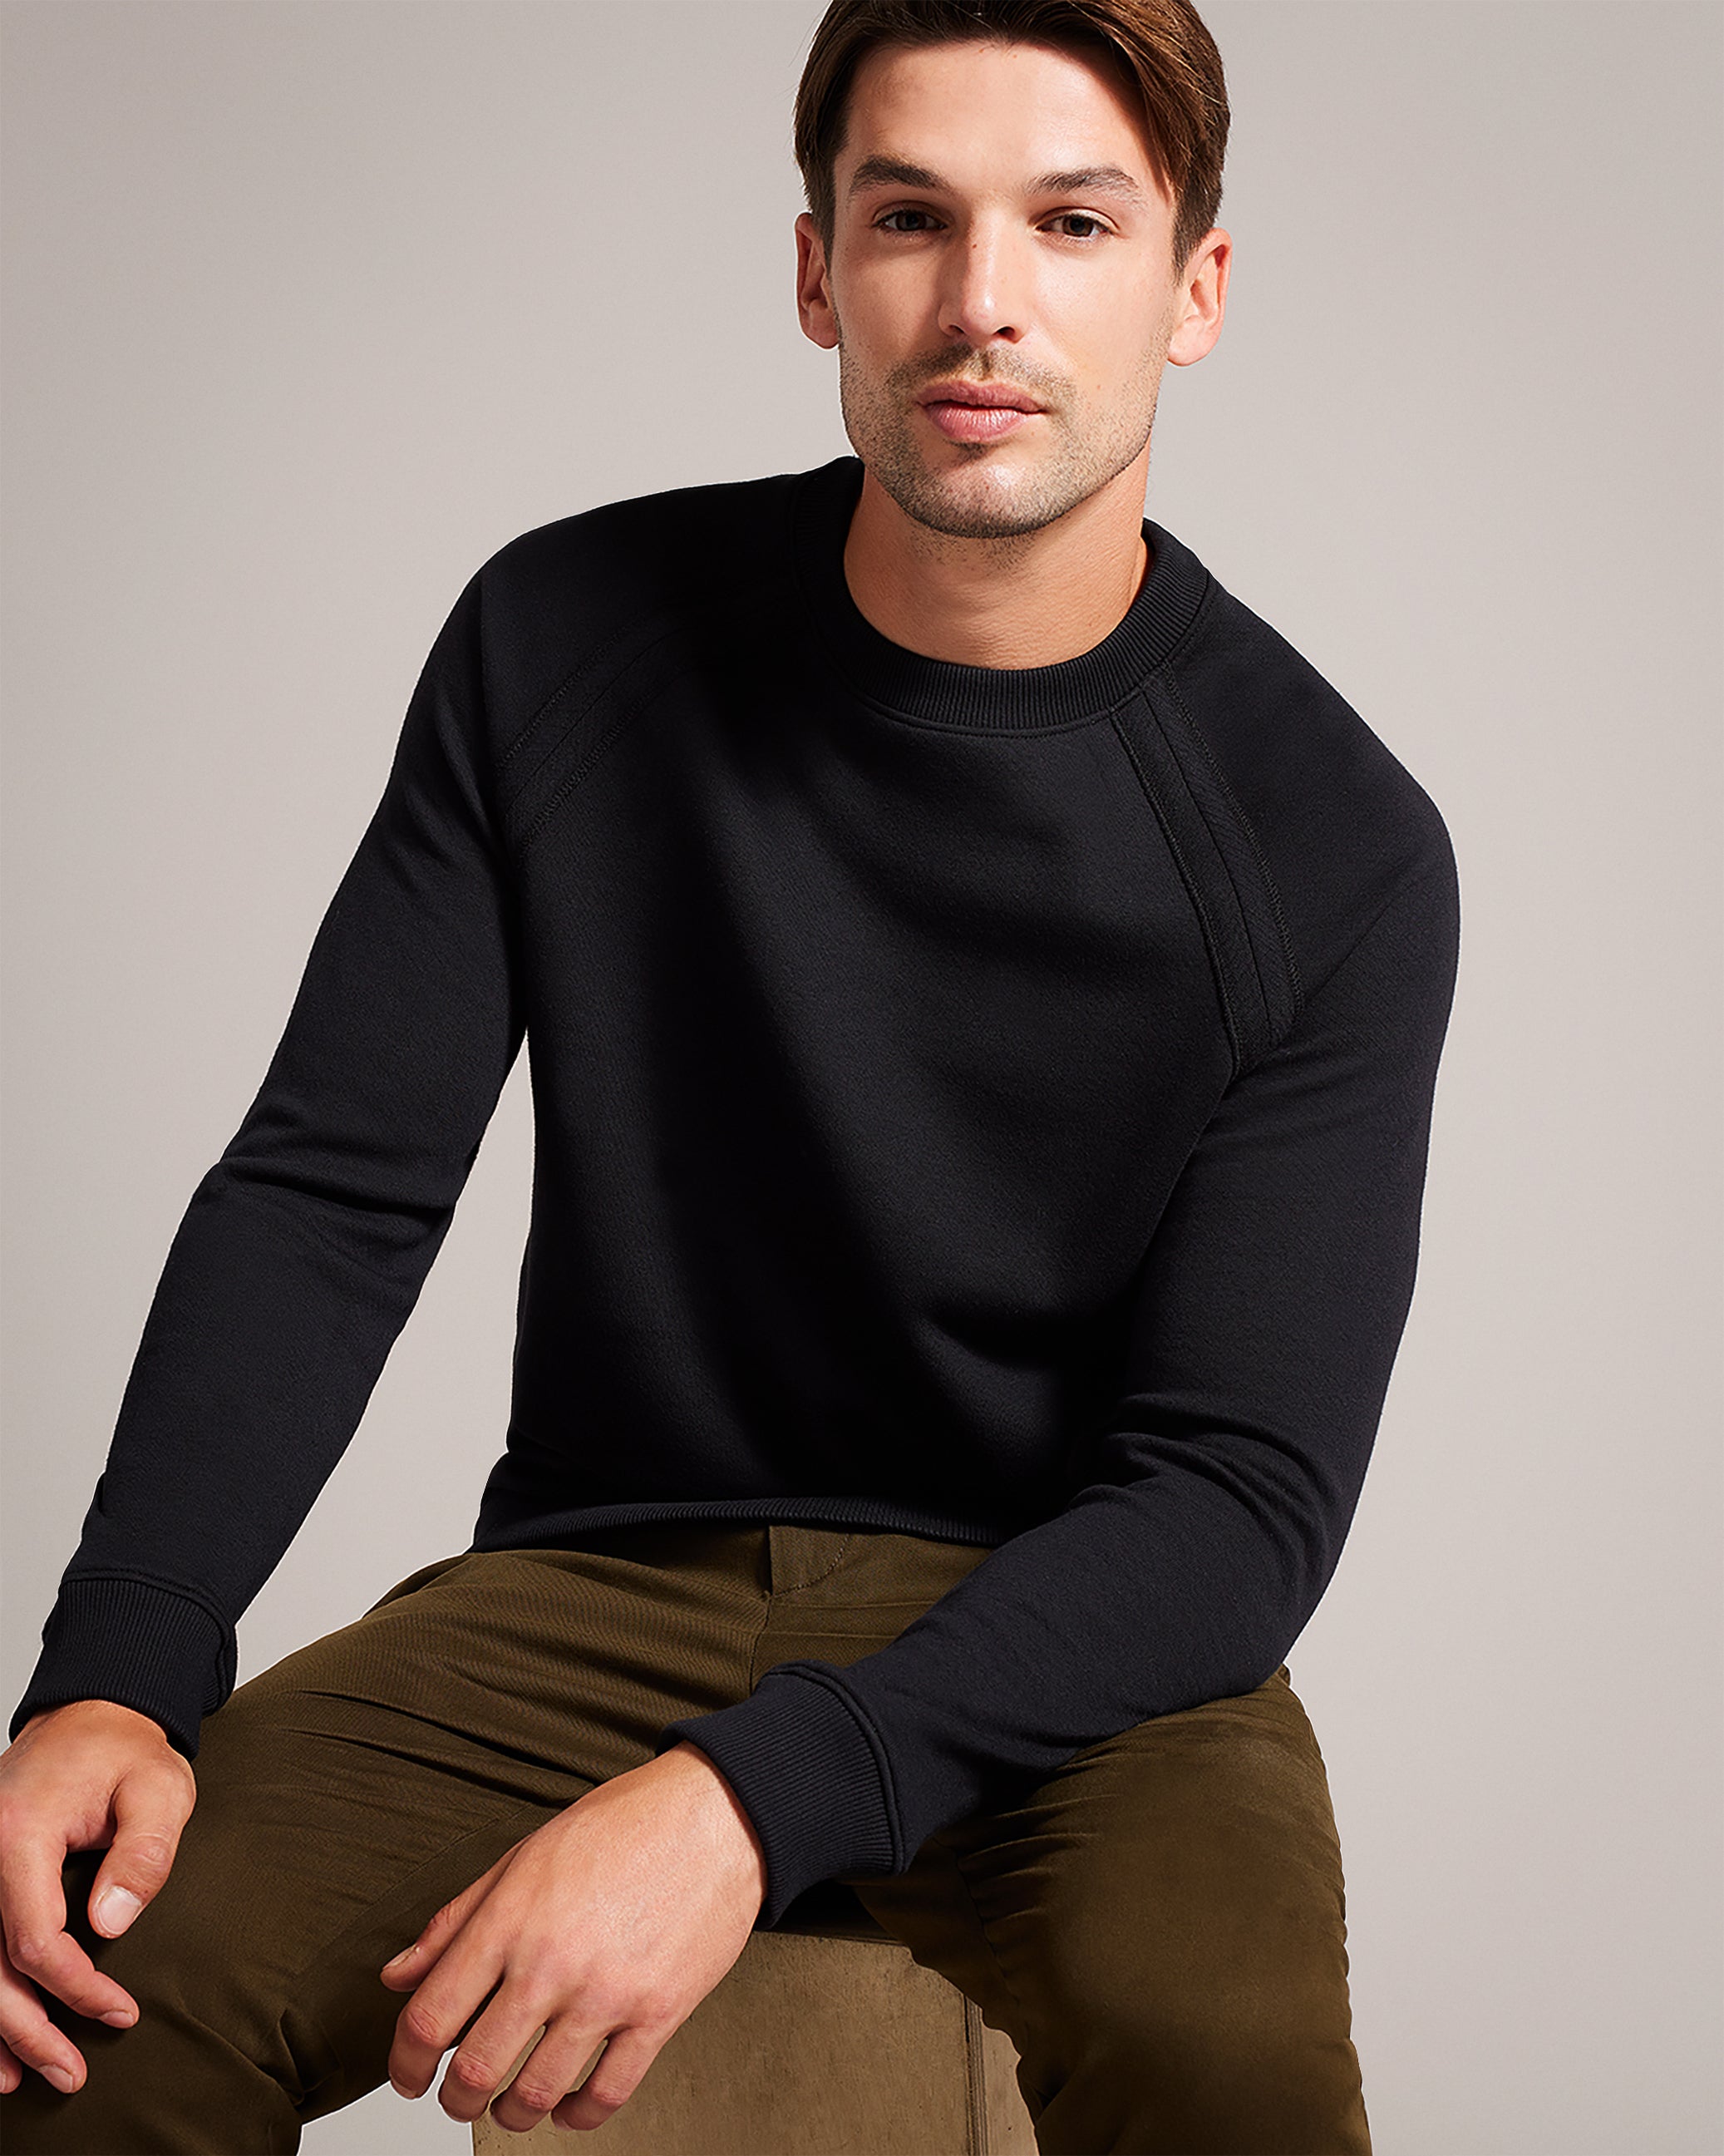 Men's Clothing – Ted Baker, Canada